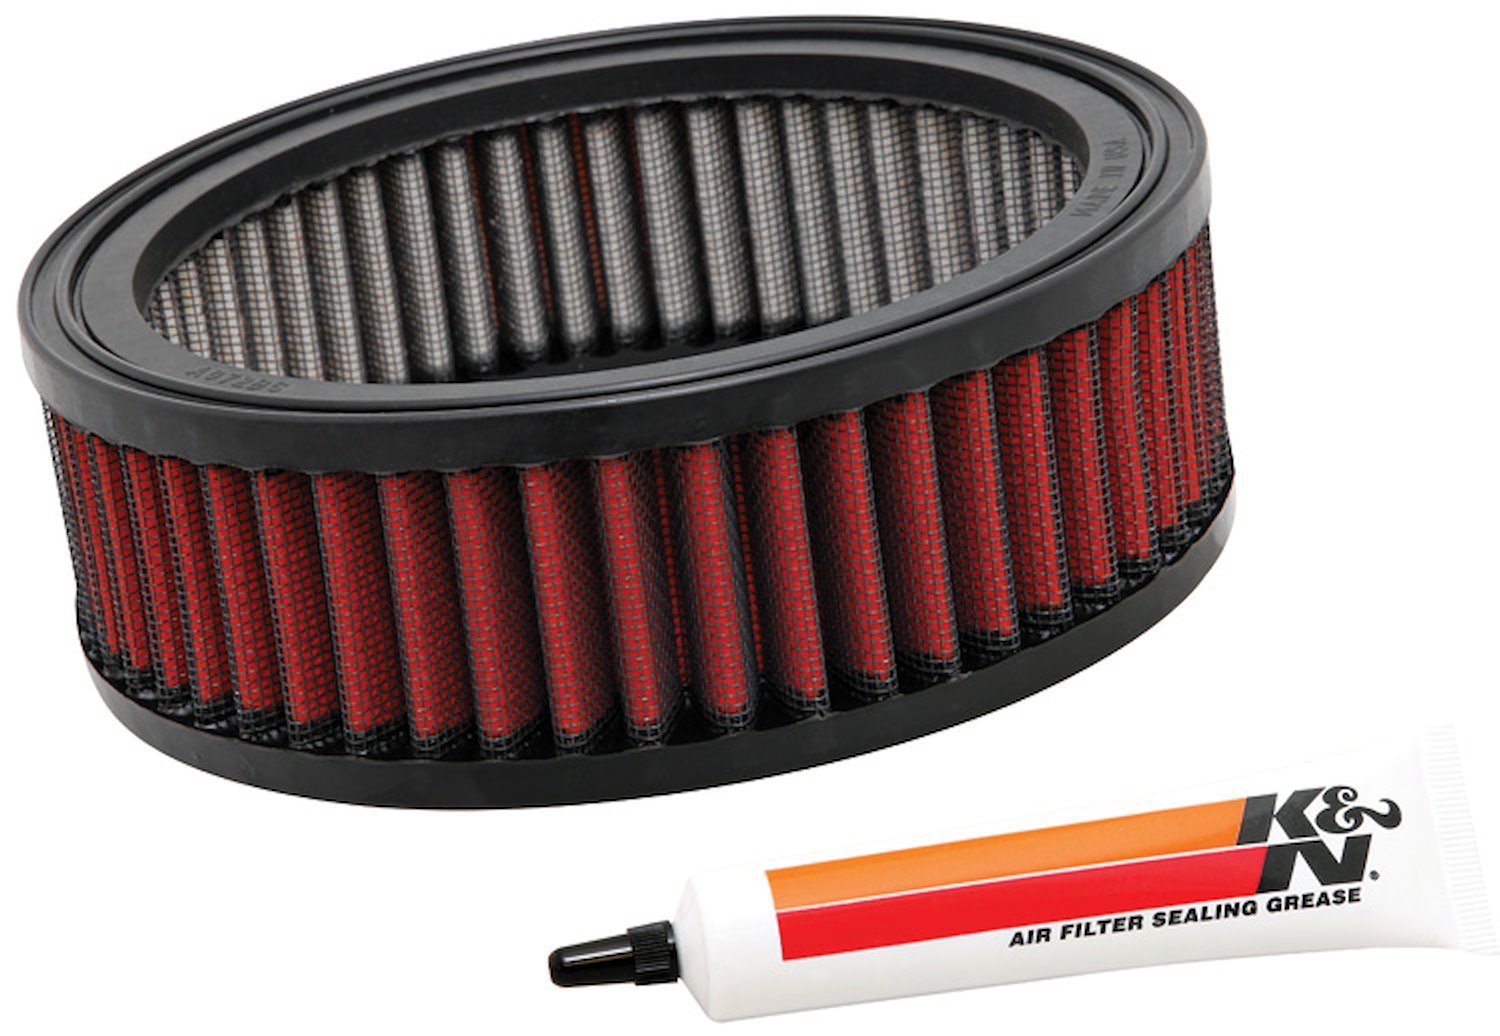 Standard-Flow Heavy-Duty Air Filter Briggs and Stratton small engines